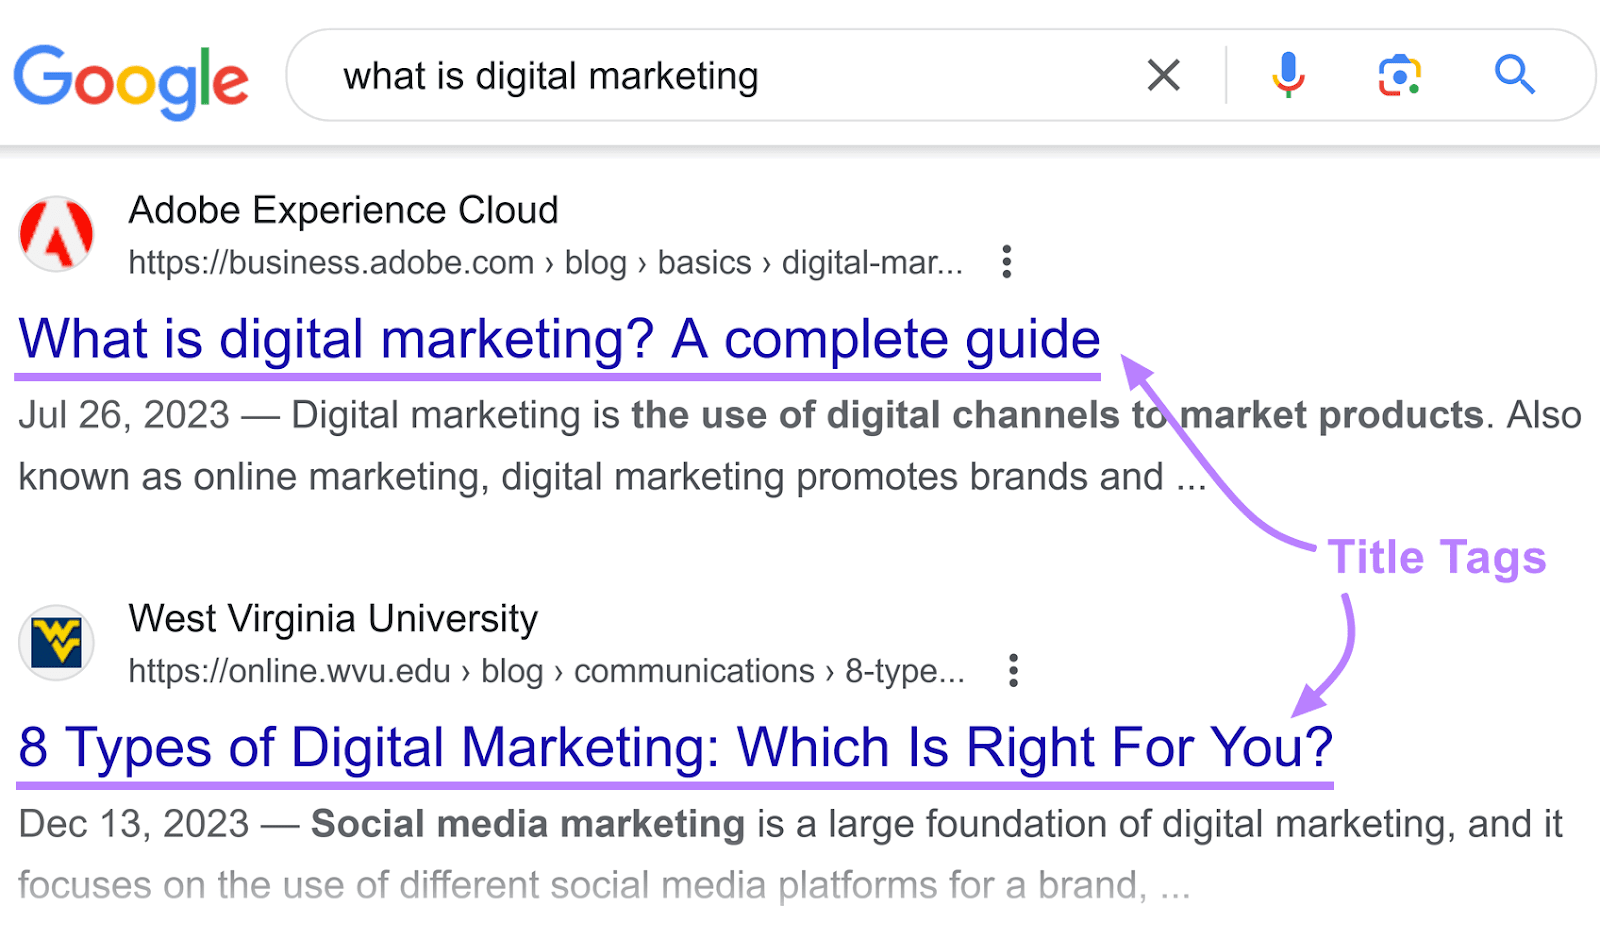 Google search results for "what is digital marketing" with annotations highlighting the title tags of two articles.